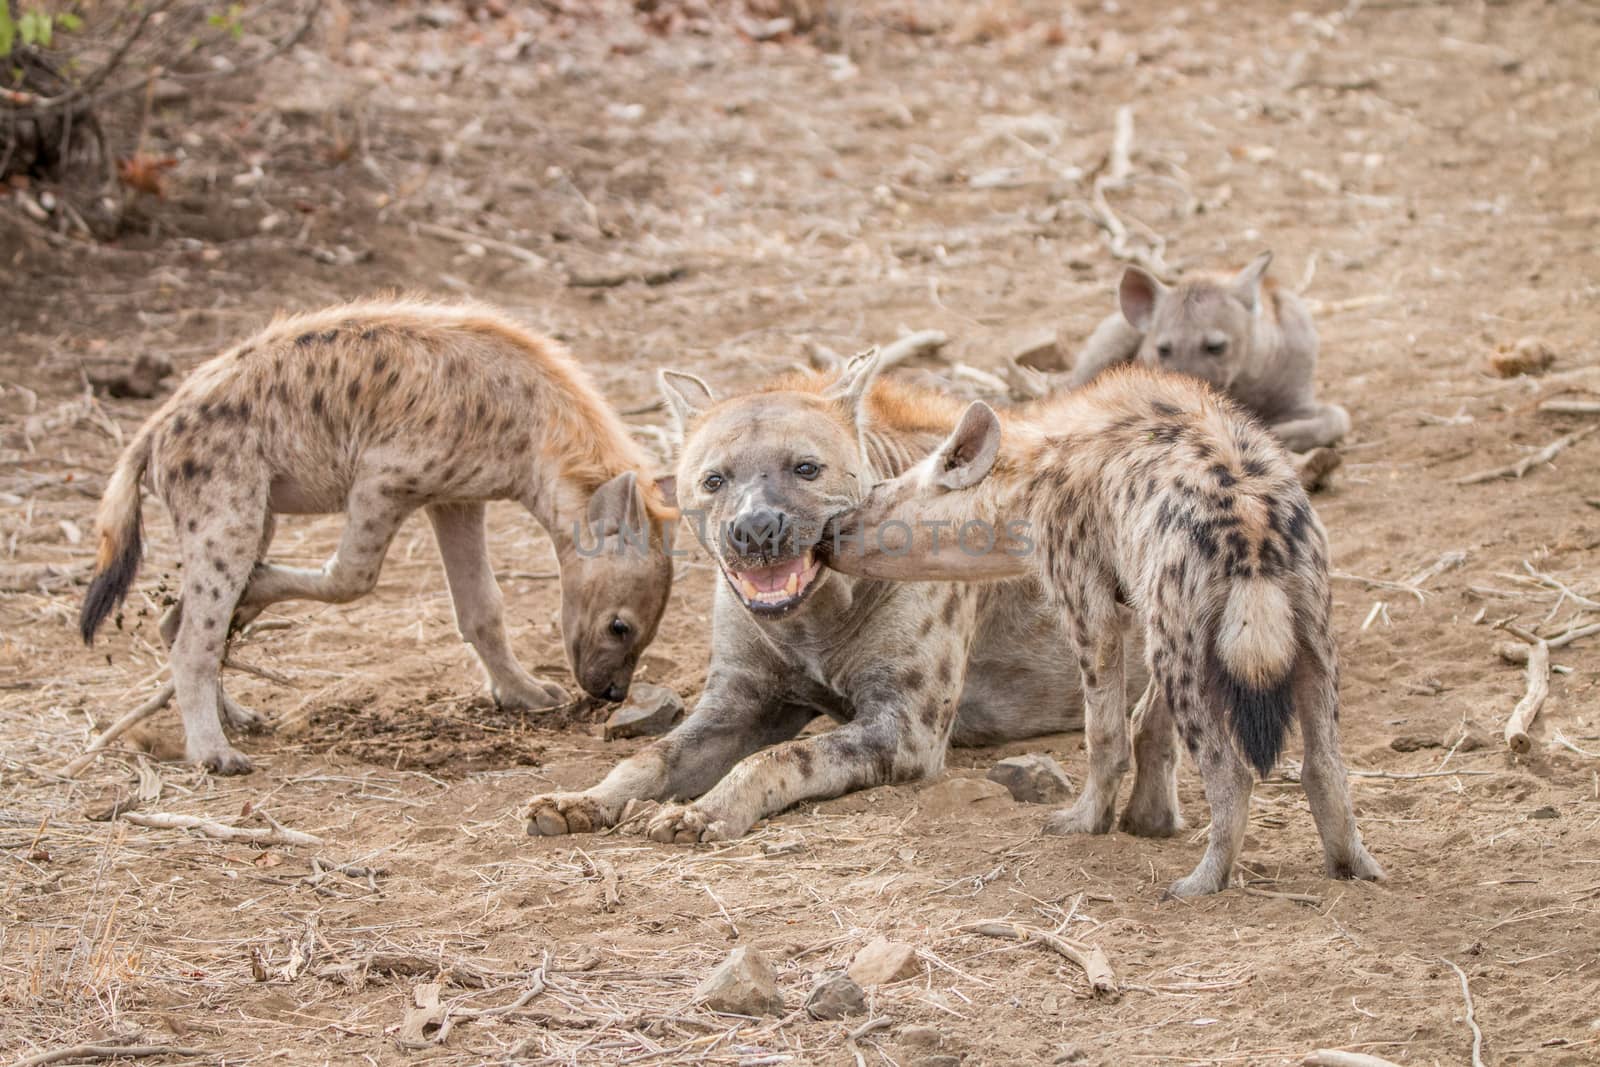 Spotted hyena cubs with mother Hyena in the Kruger National Park, South Africa.